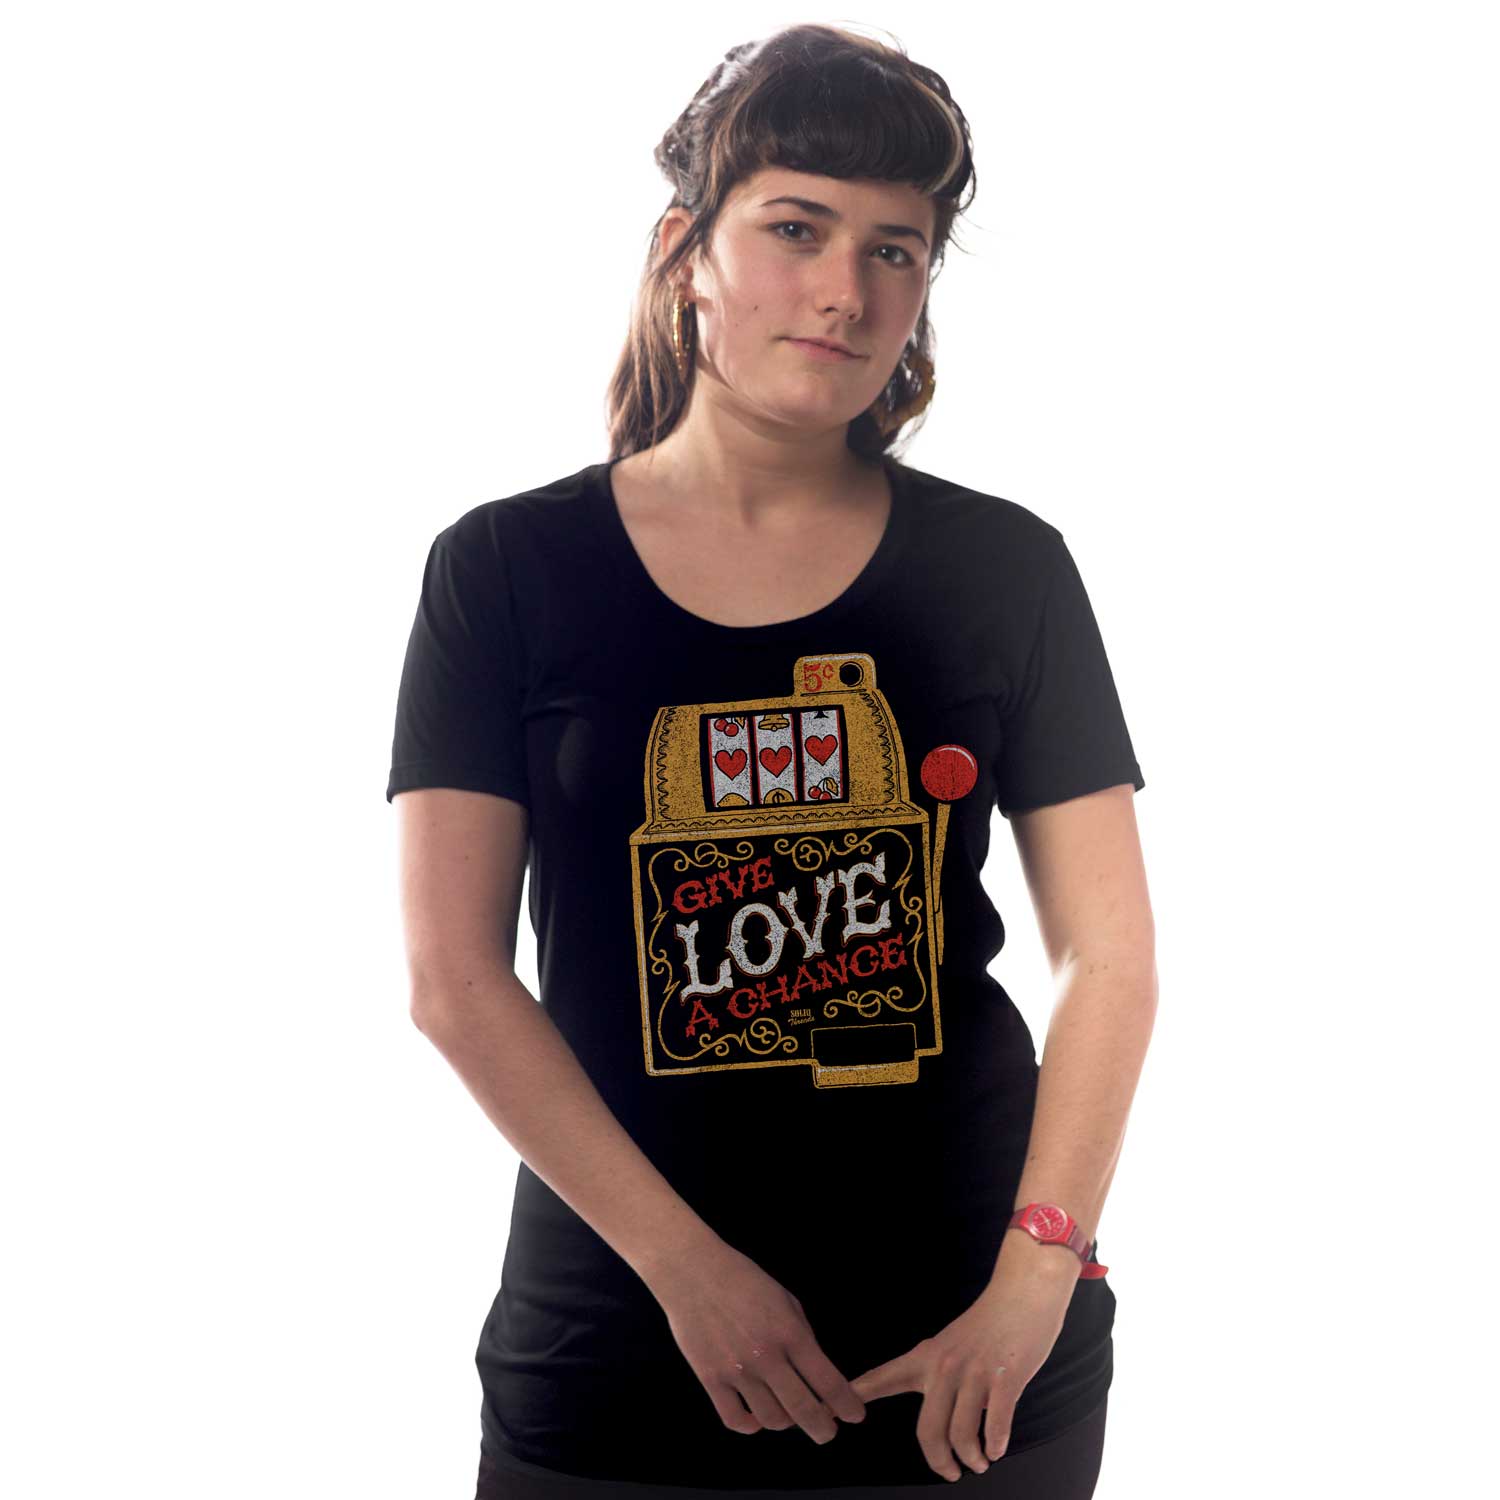 Women's Give Love A Chance Vintage Graphic Tee | Cool Slot Machine T-shirt on Model | Solid Threads